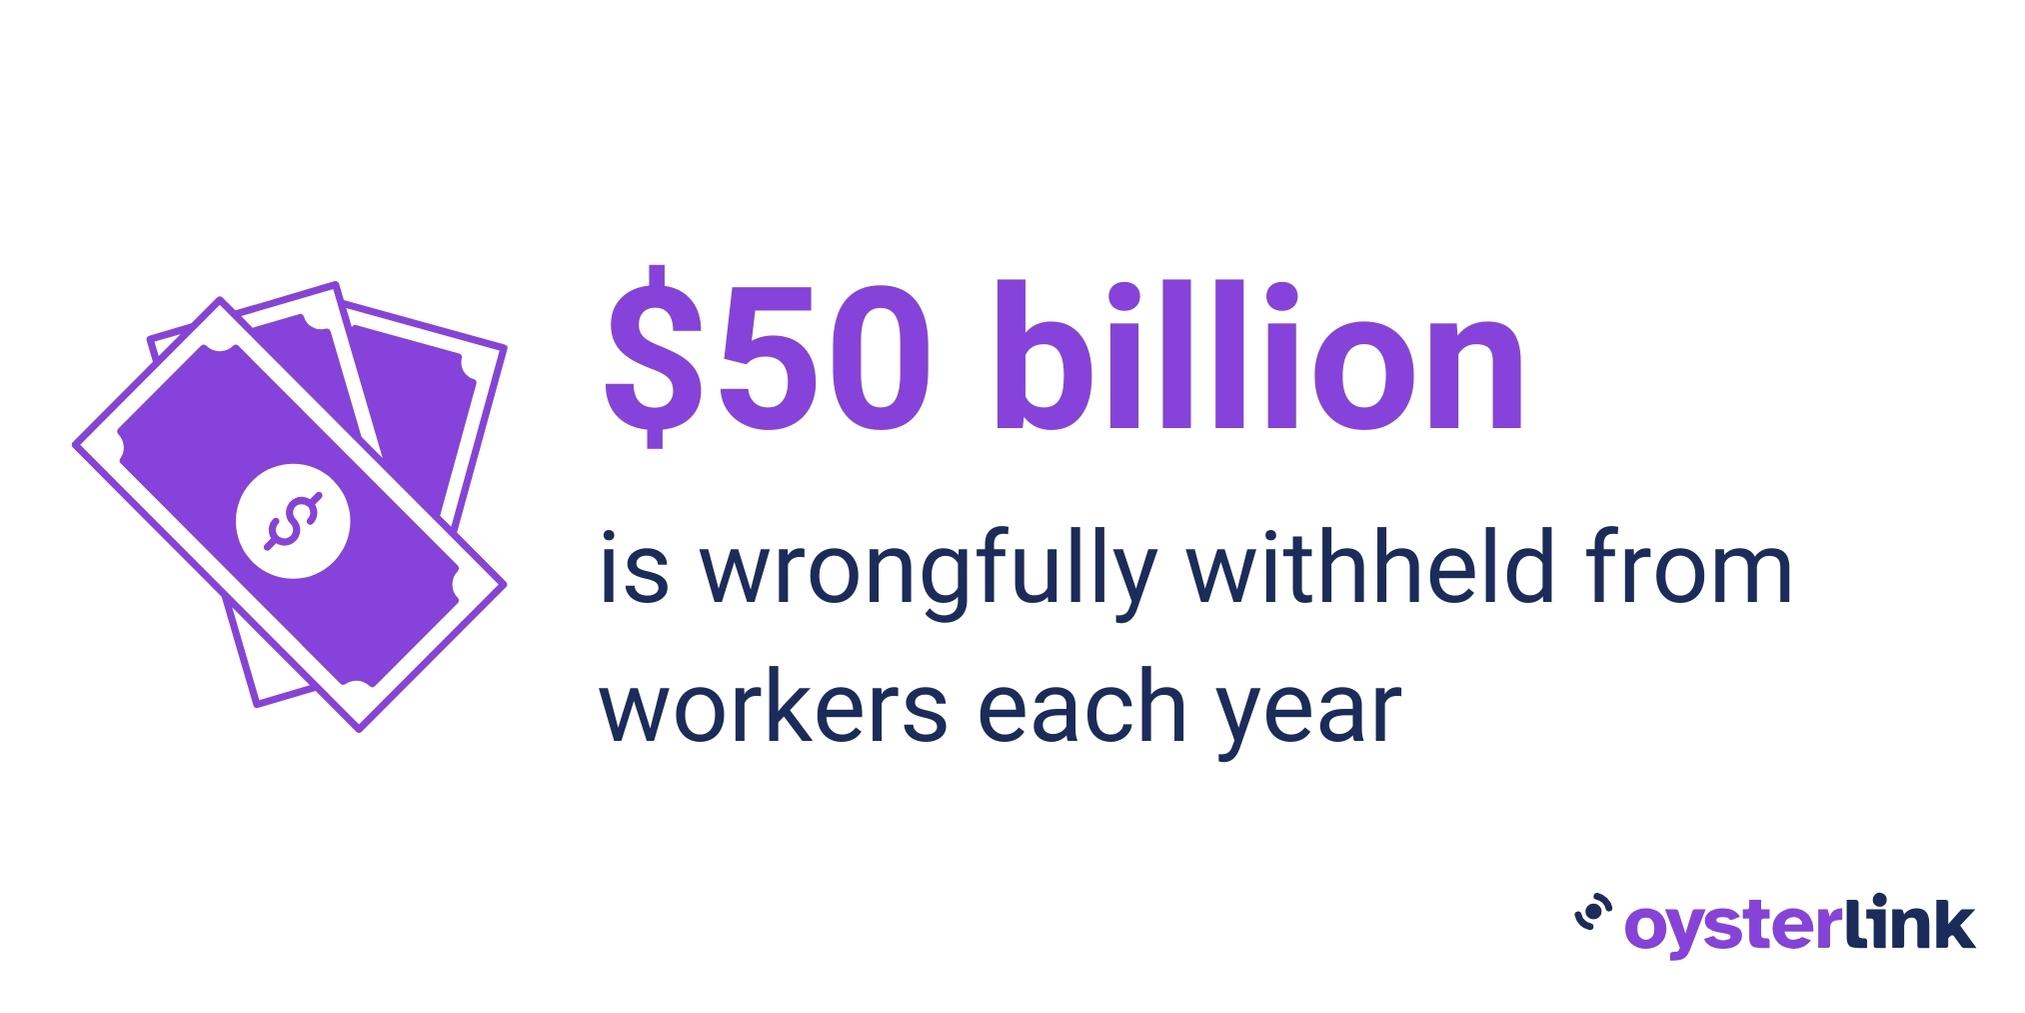 A graphic showing how $50 billion is wrongfully withheld from workers every year